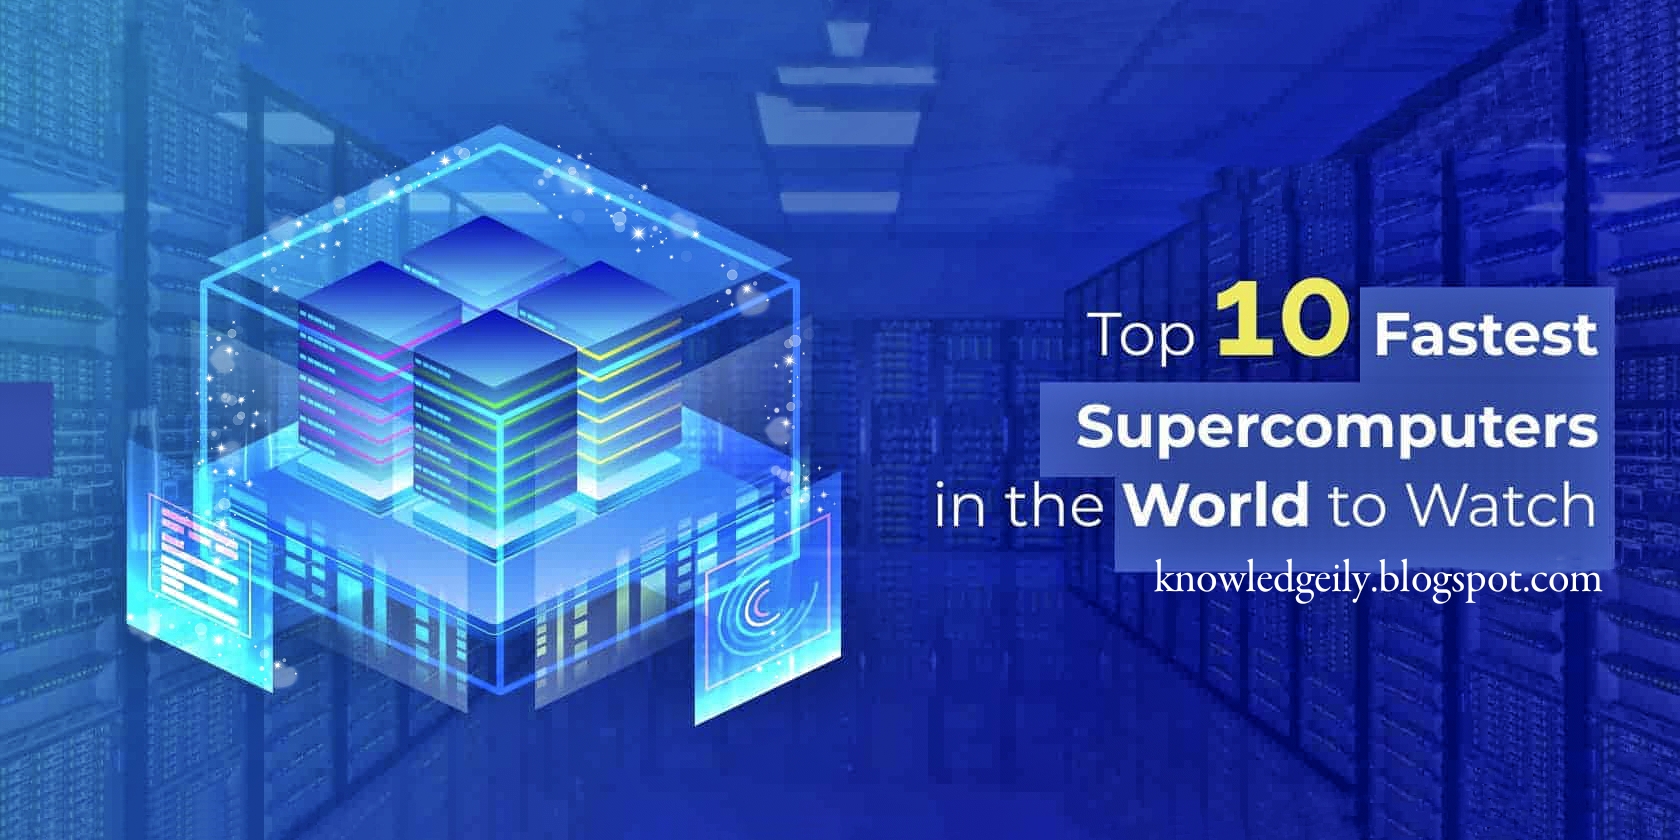 Top 10 Supercomputers in the World